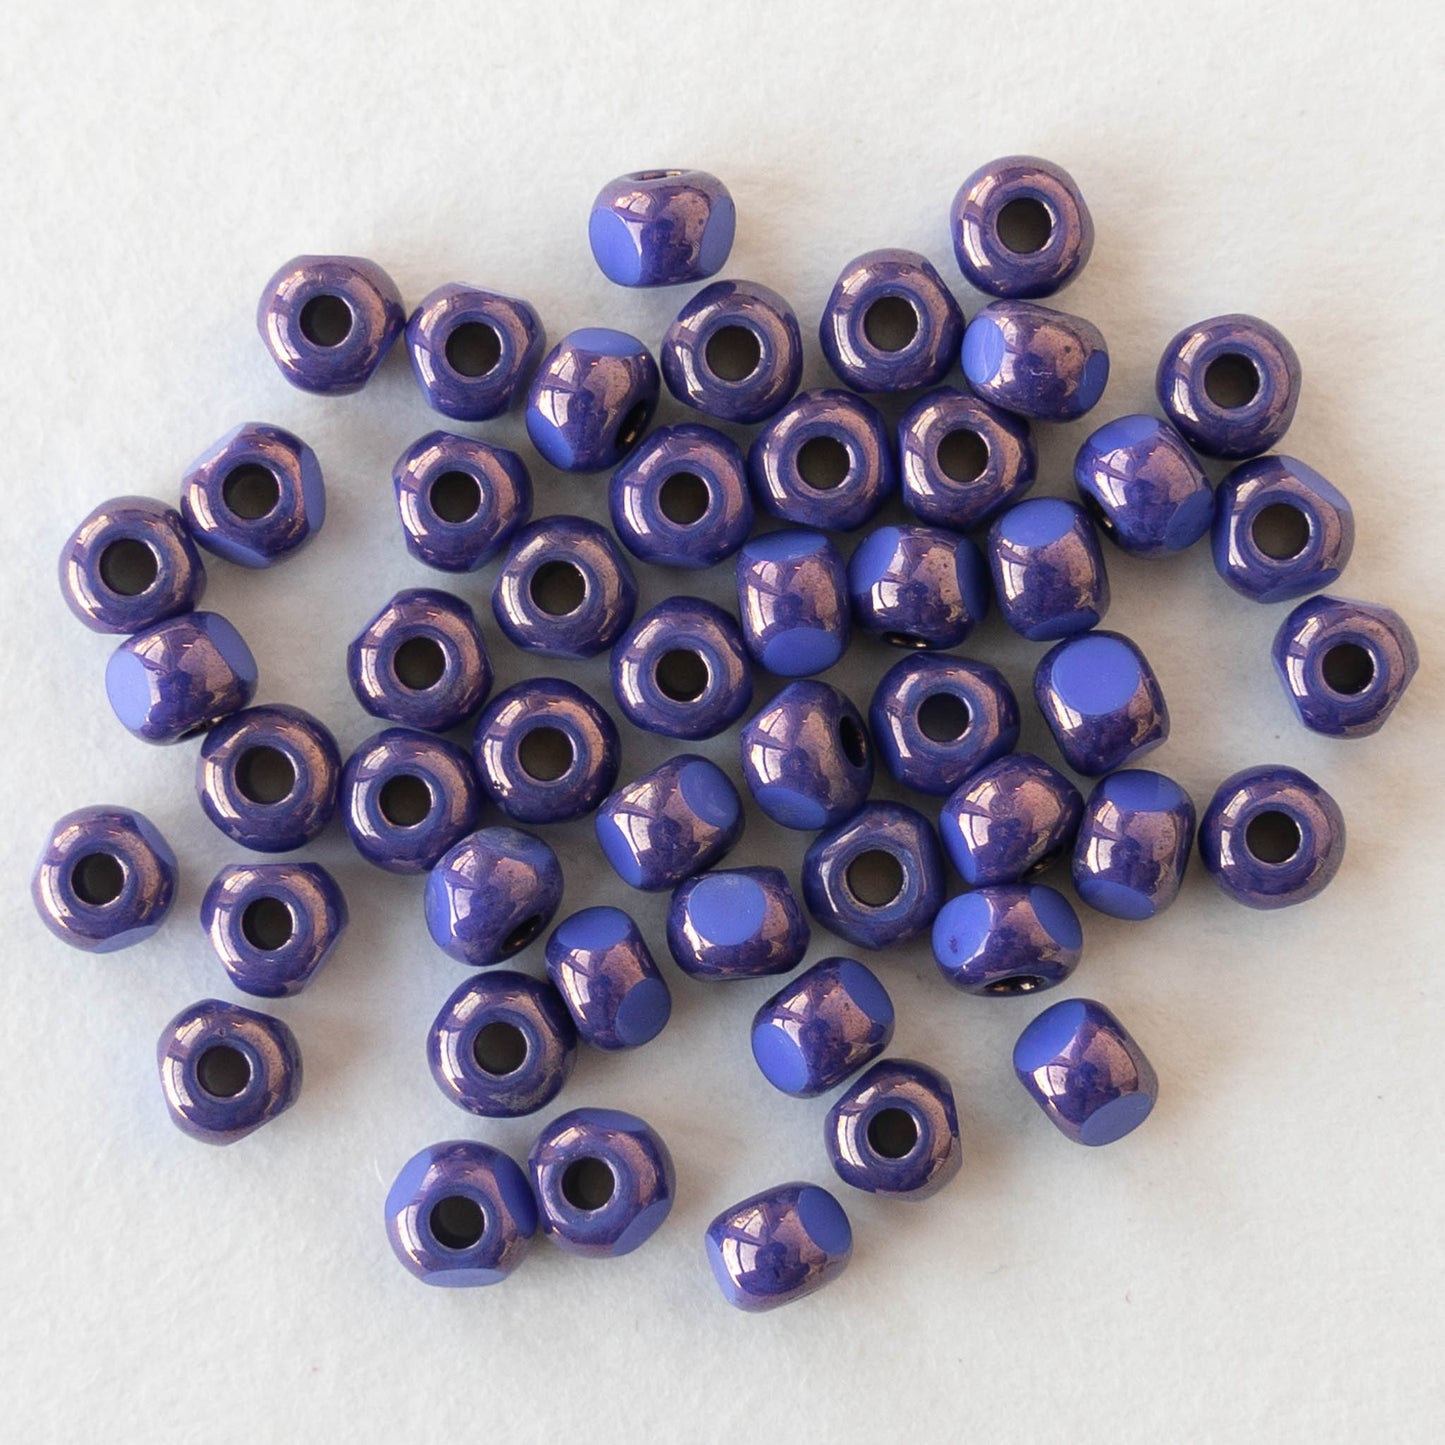 Size 6 Tri-cut Beads -  Opaque Lapis Lazuli Blue With Bronze - 50 beads